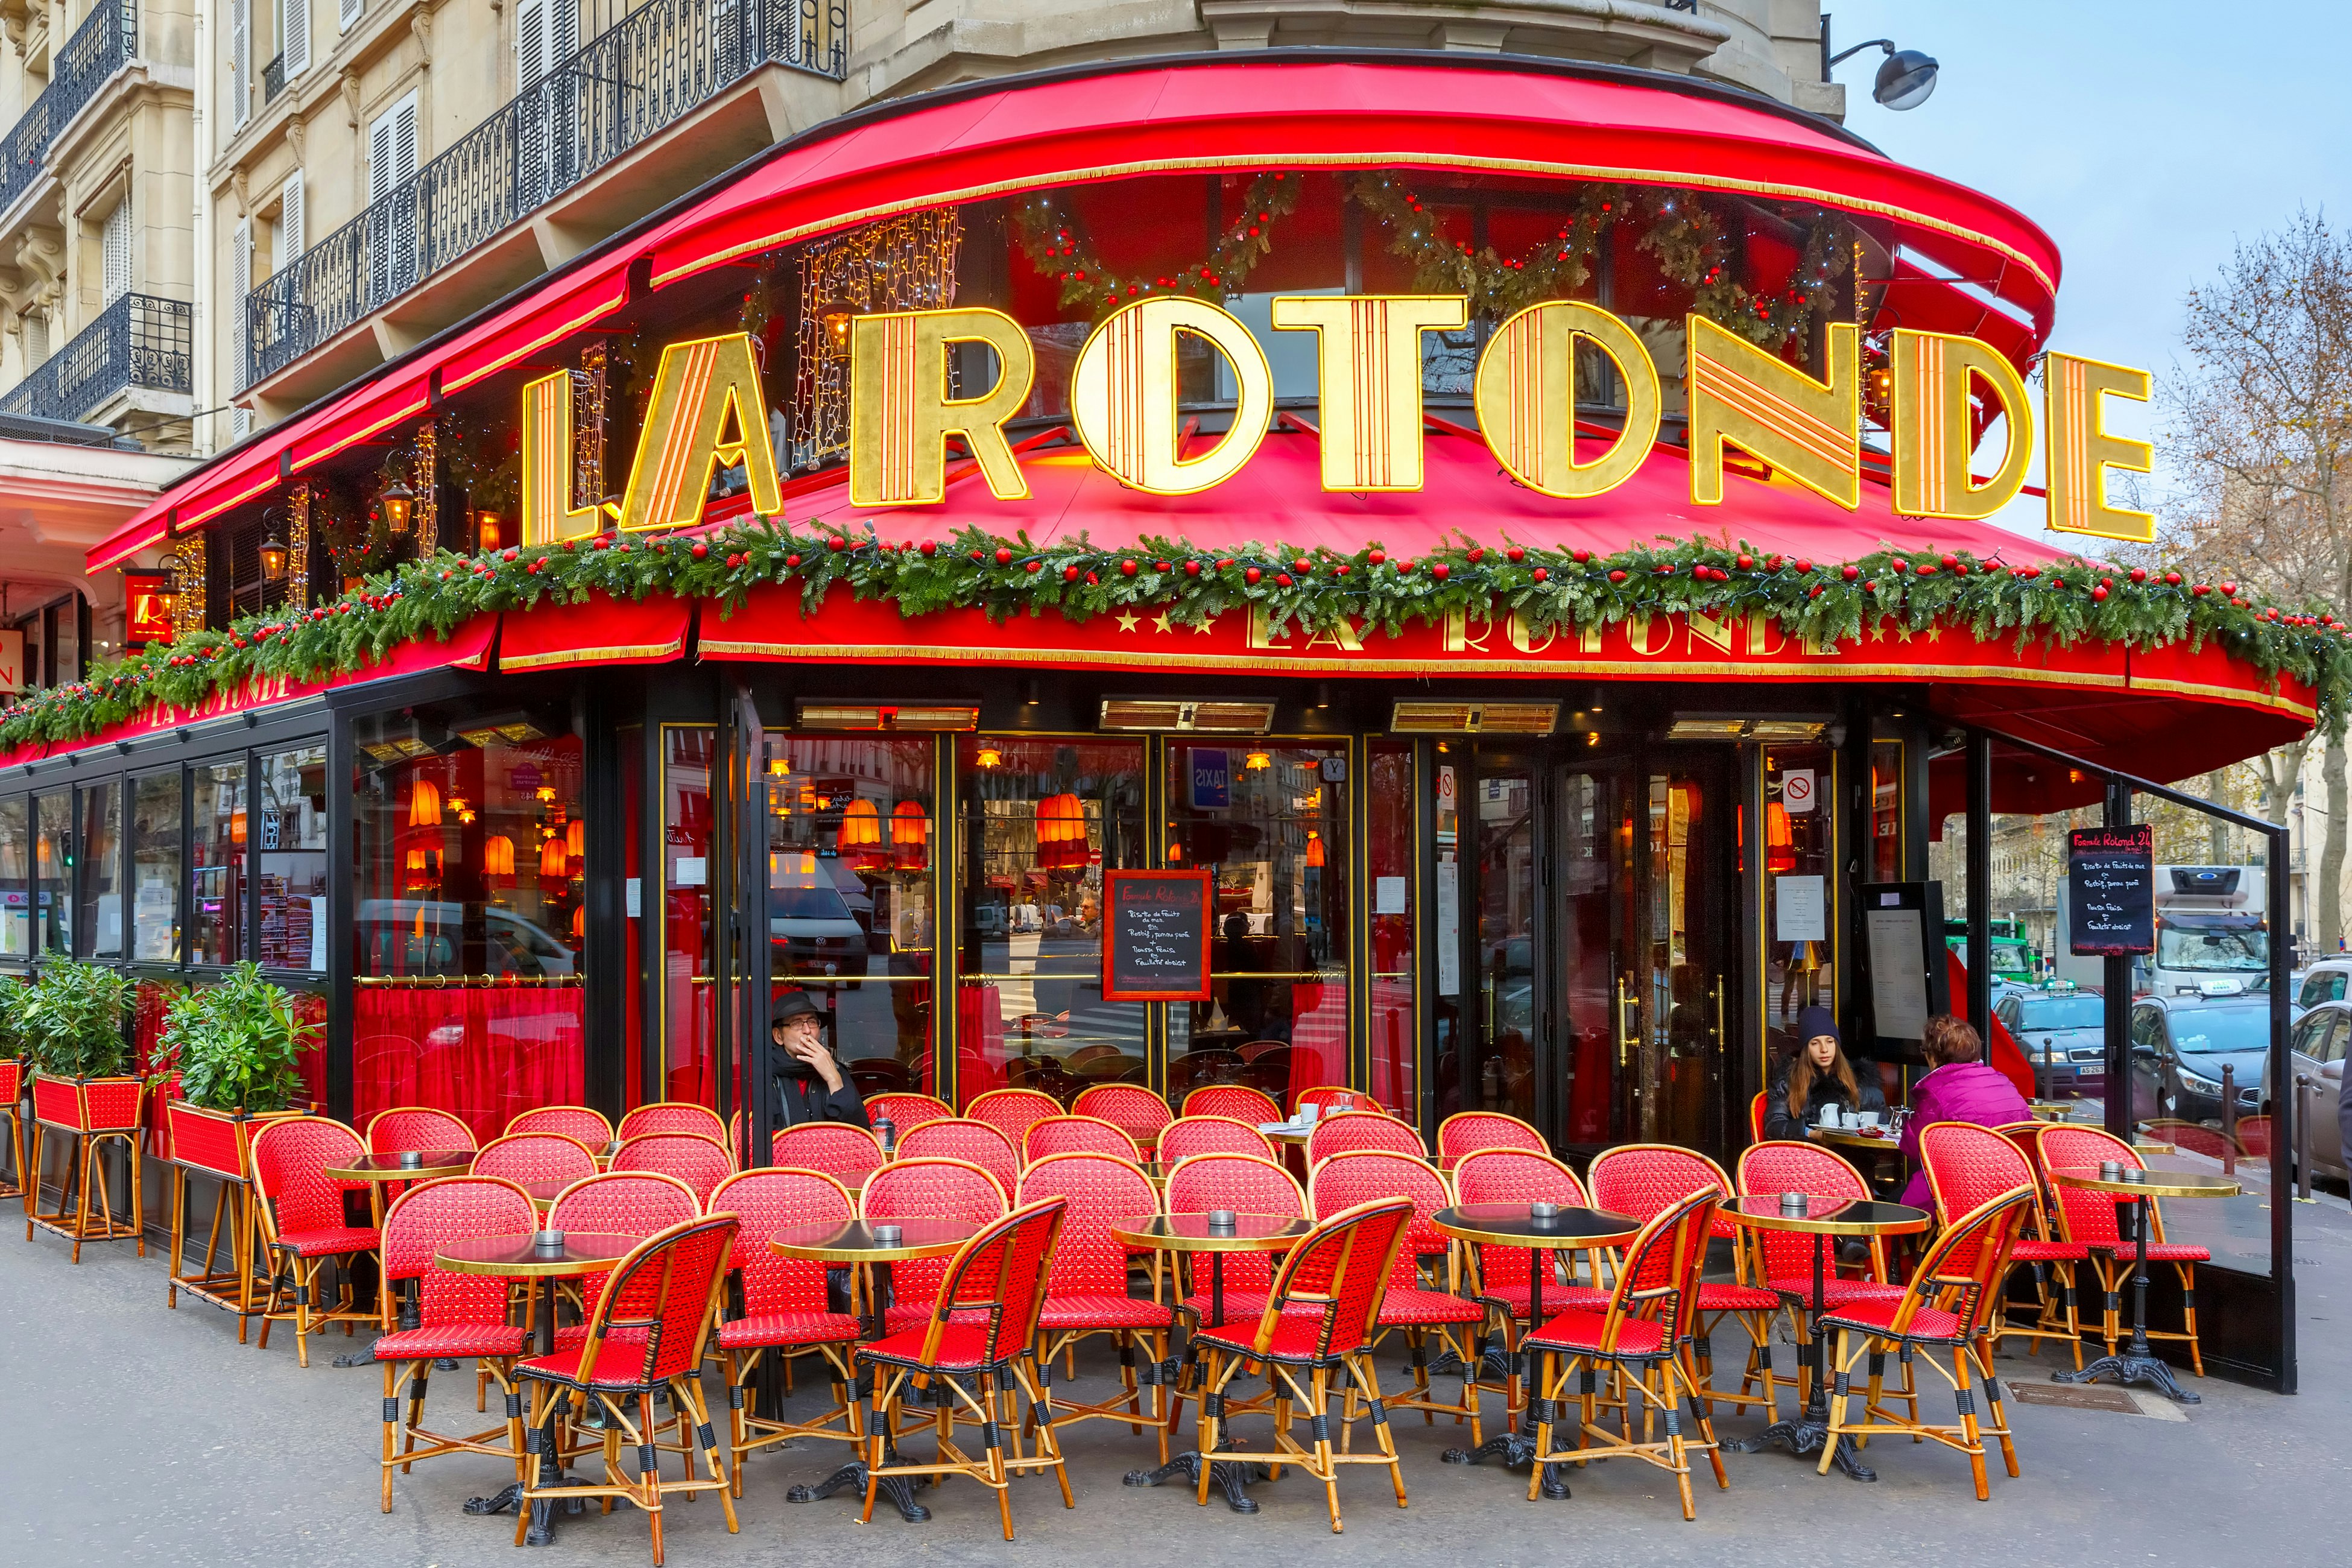 the red chairs and red marquee of La Rotonde of the Montparnasse Quarter in Paris, France